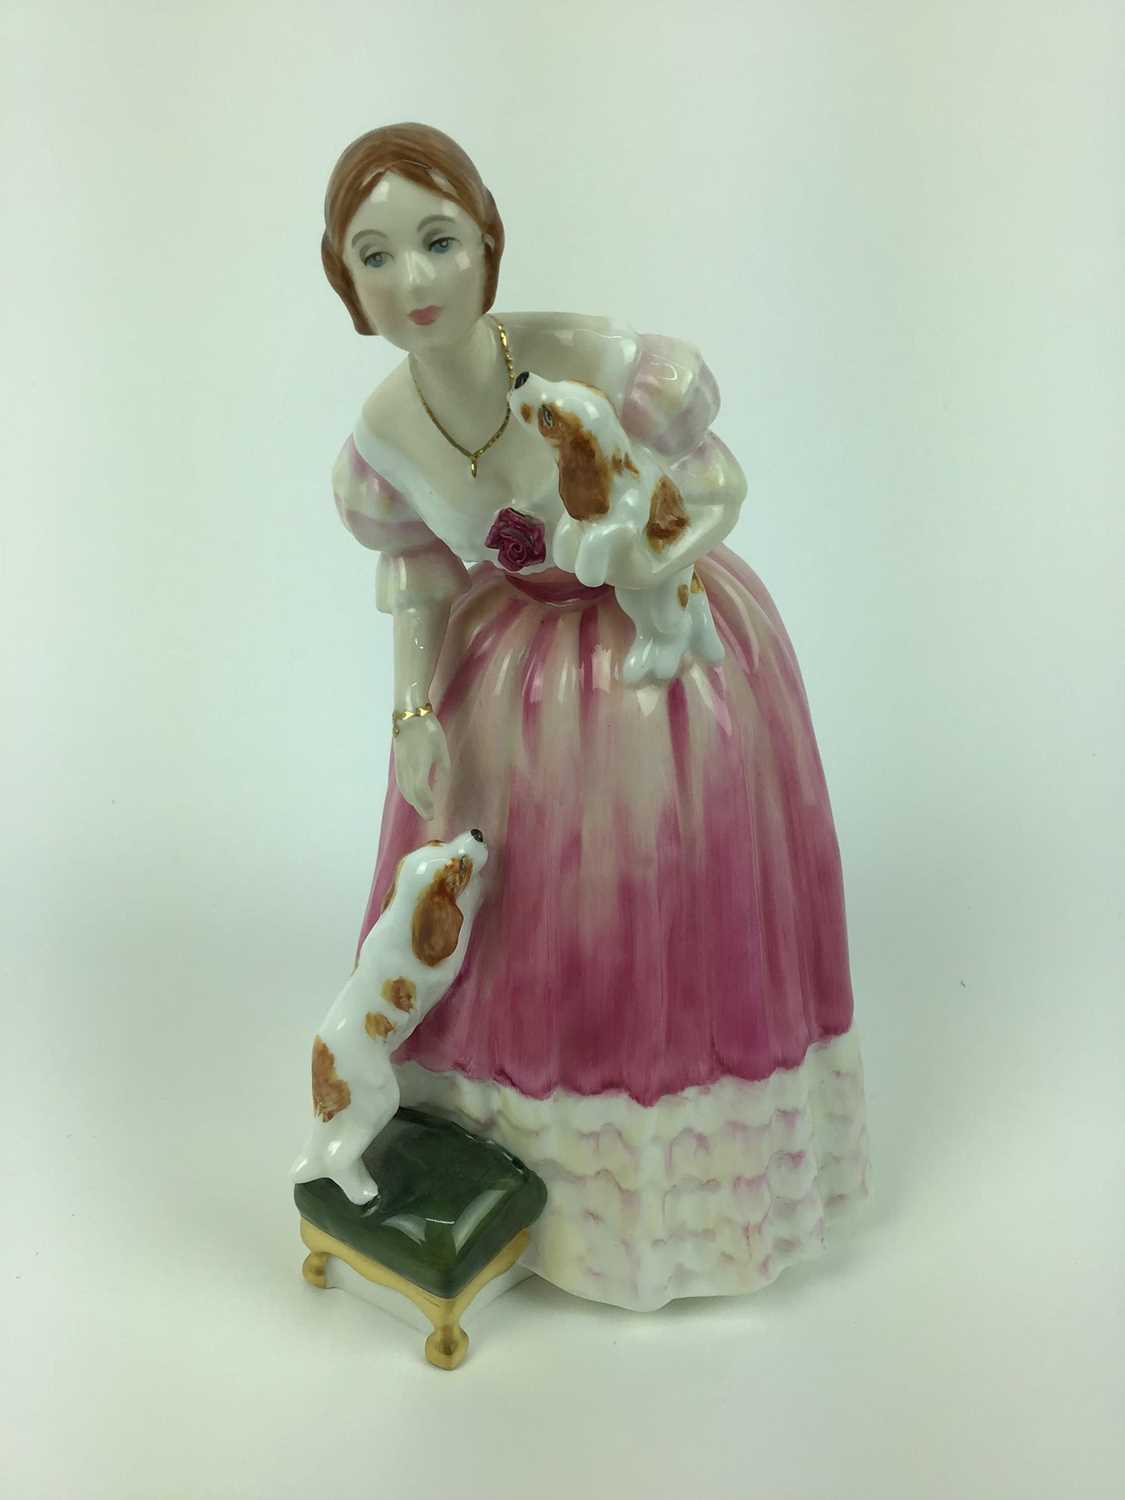 Lot 8 - Royal Doulton limited edition figure - Queen Victoria HN3125, no 3578 of 5000, with certificate